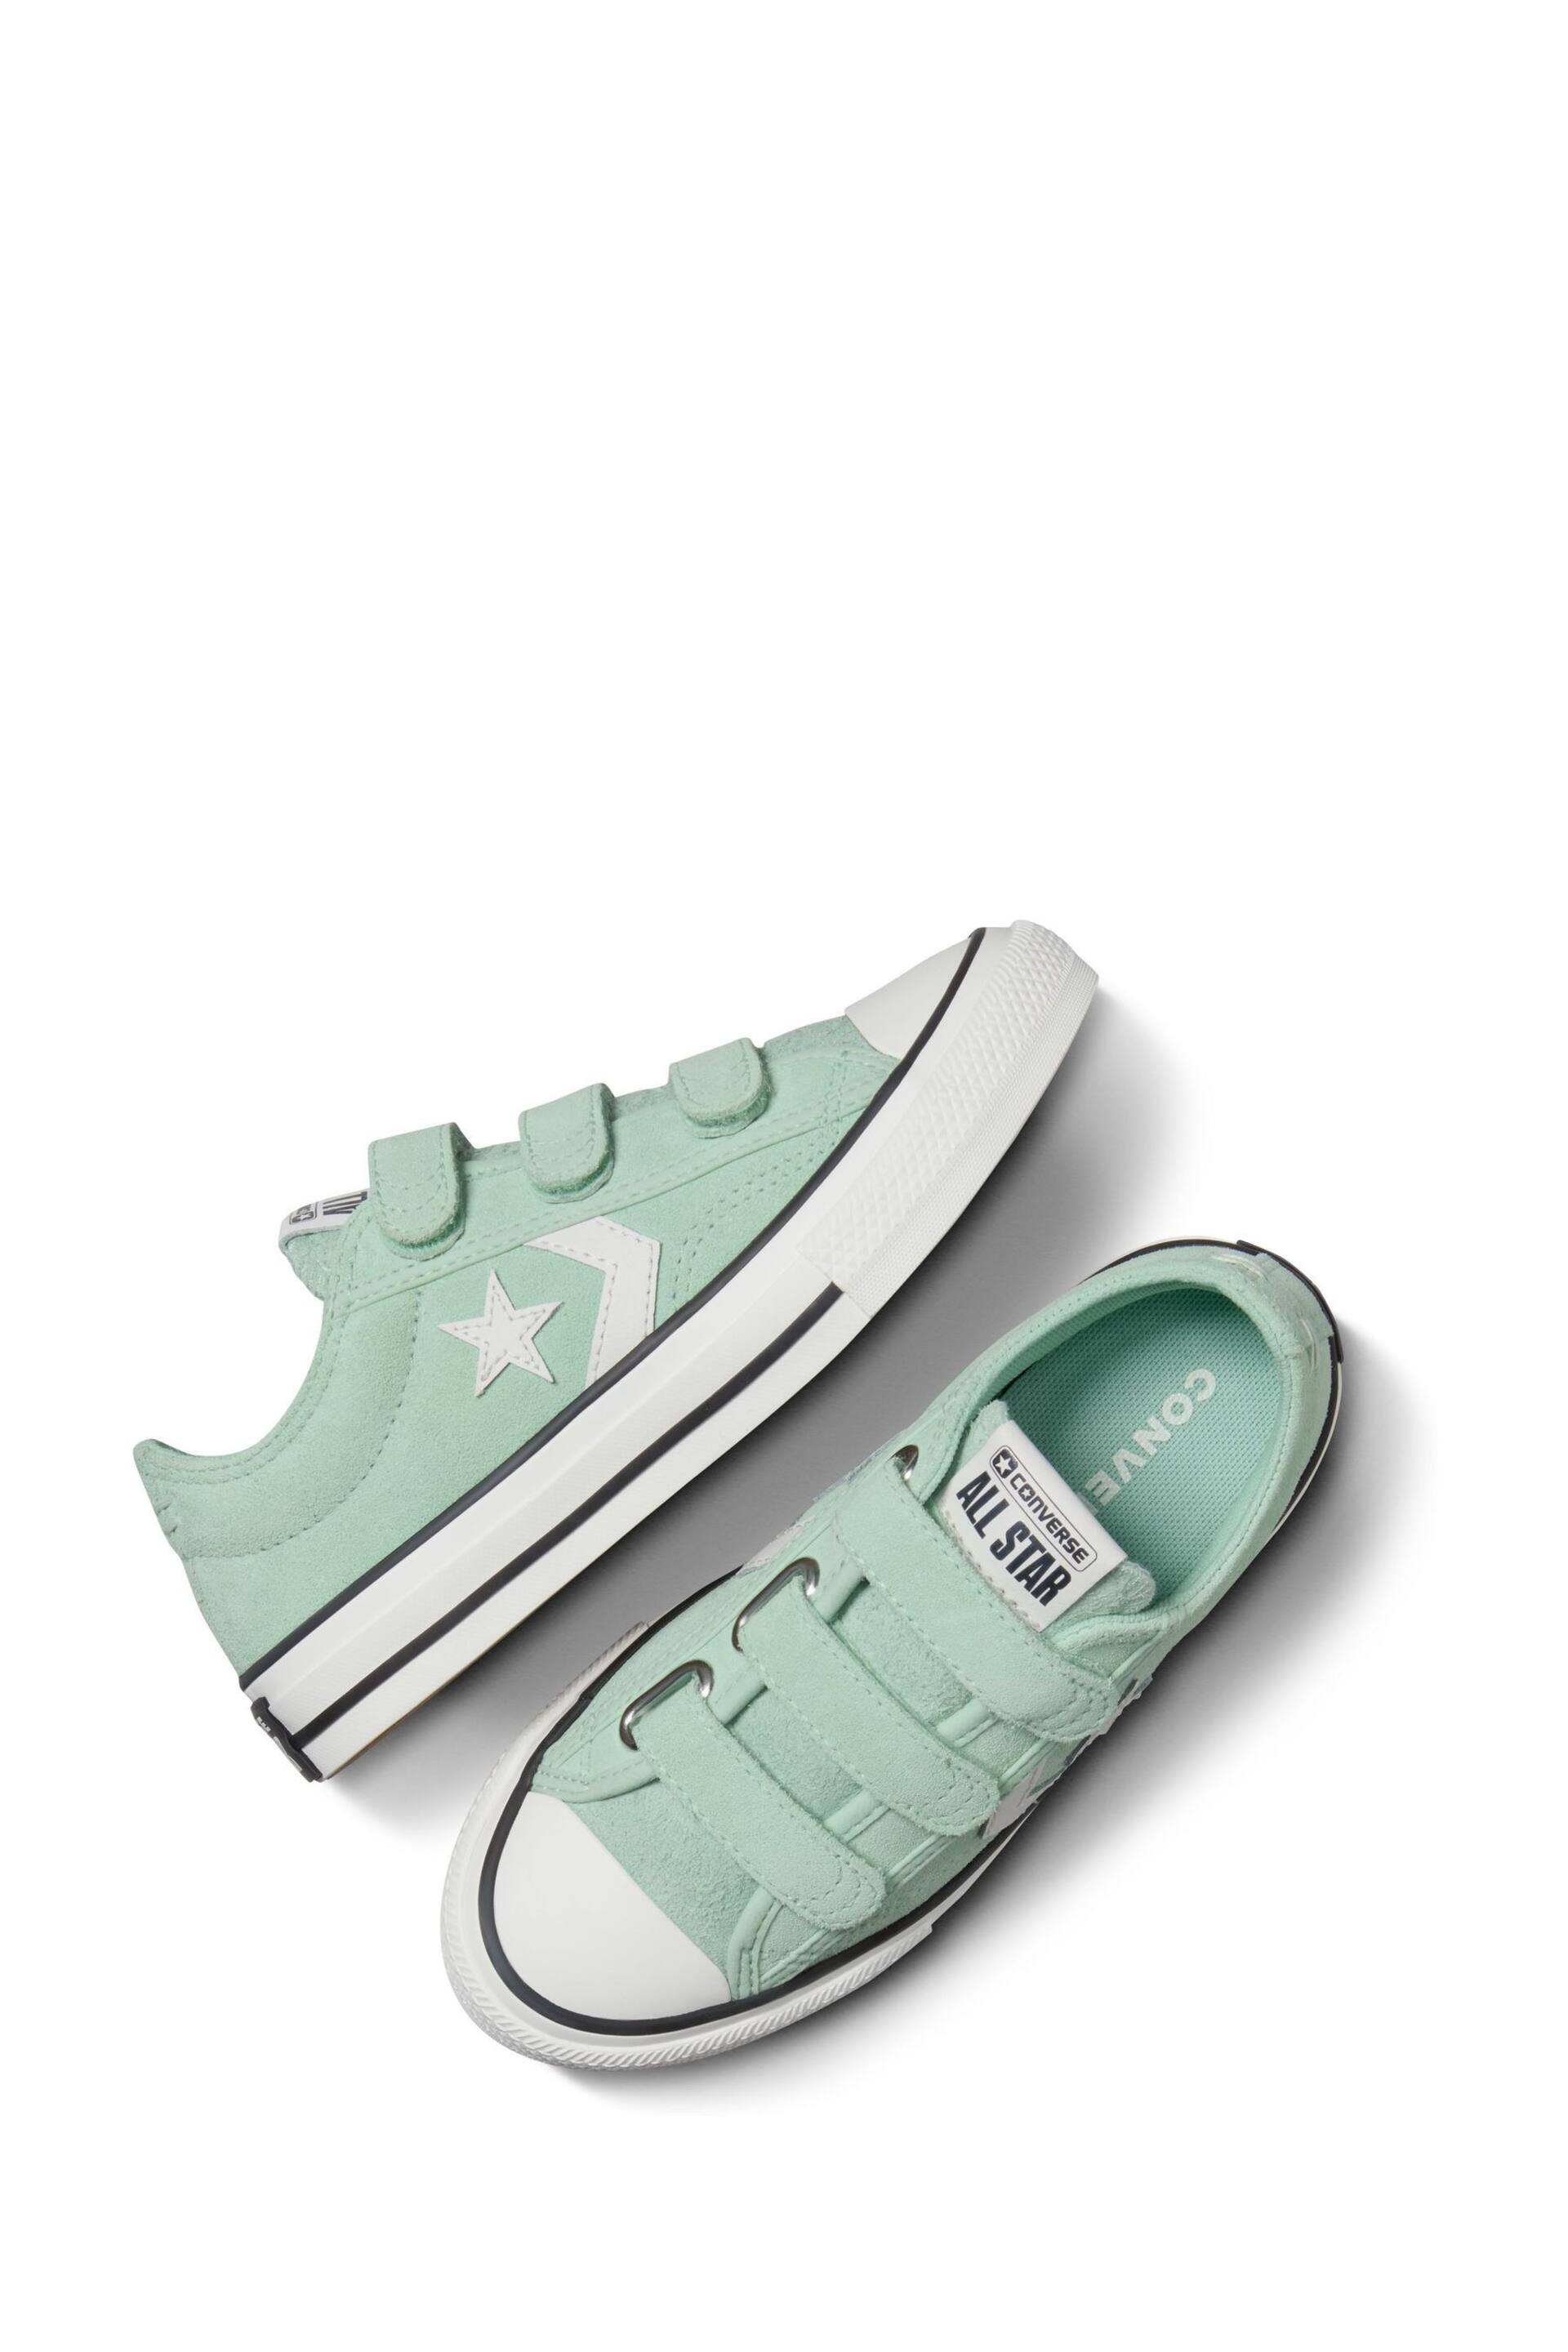 Converse Green Junior Star Player 76 3V Trainers - Image 5 of 9